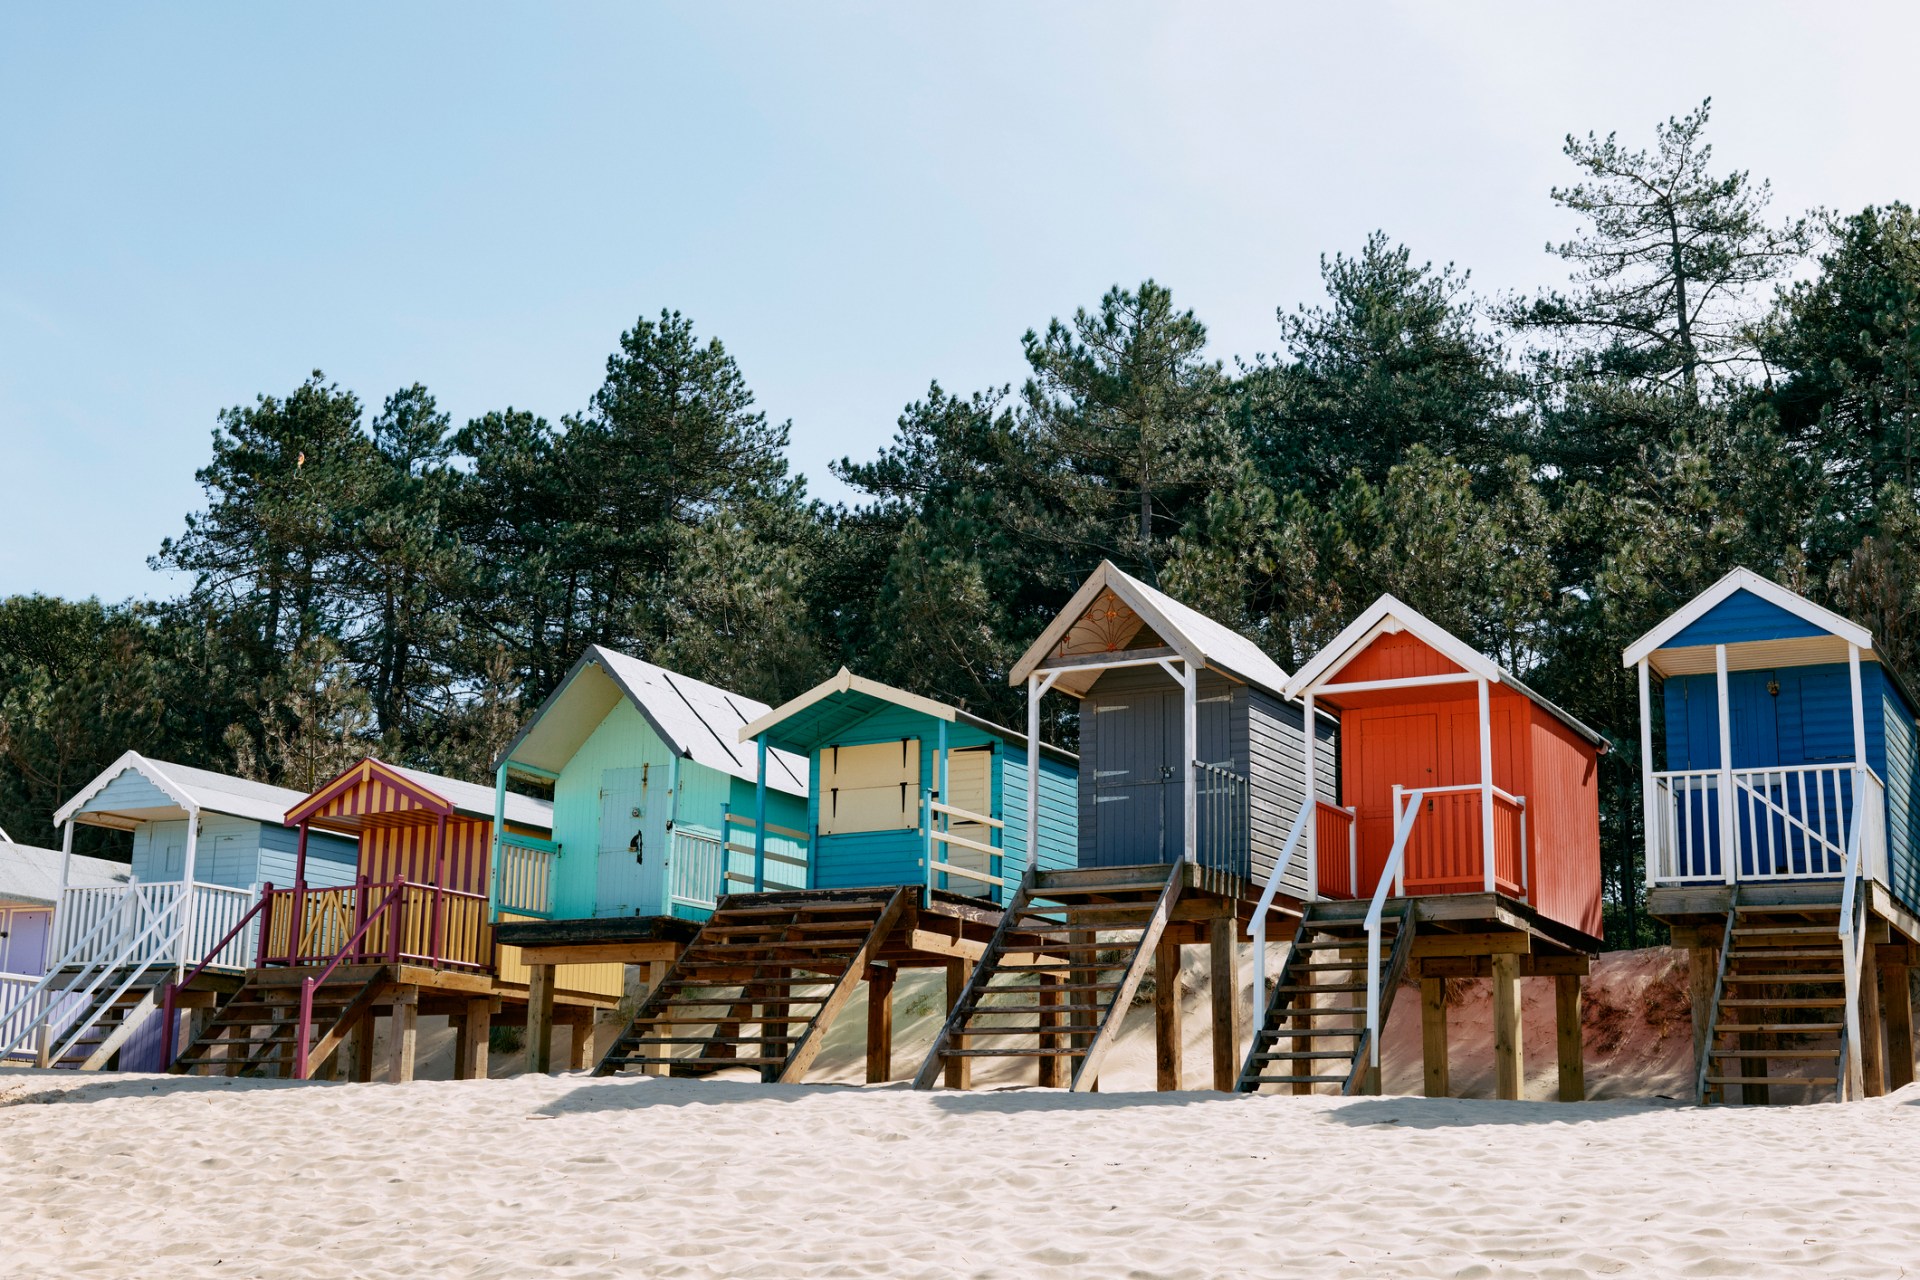 secluded 'crown jewel’ seaside destination named the uk’s best white sand beach